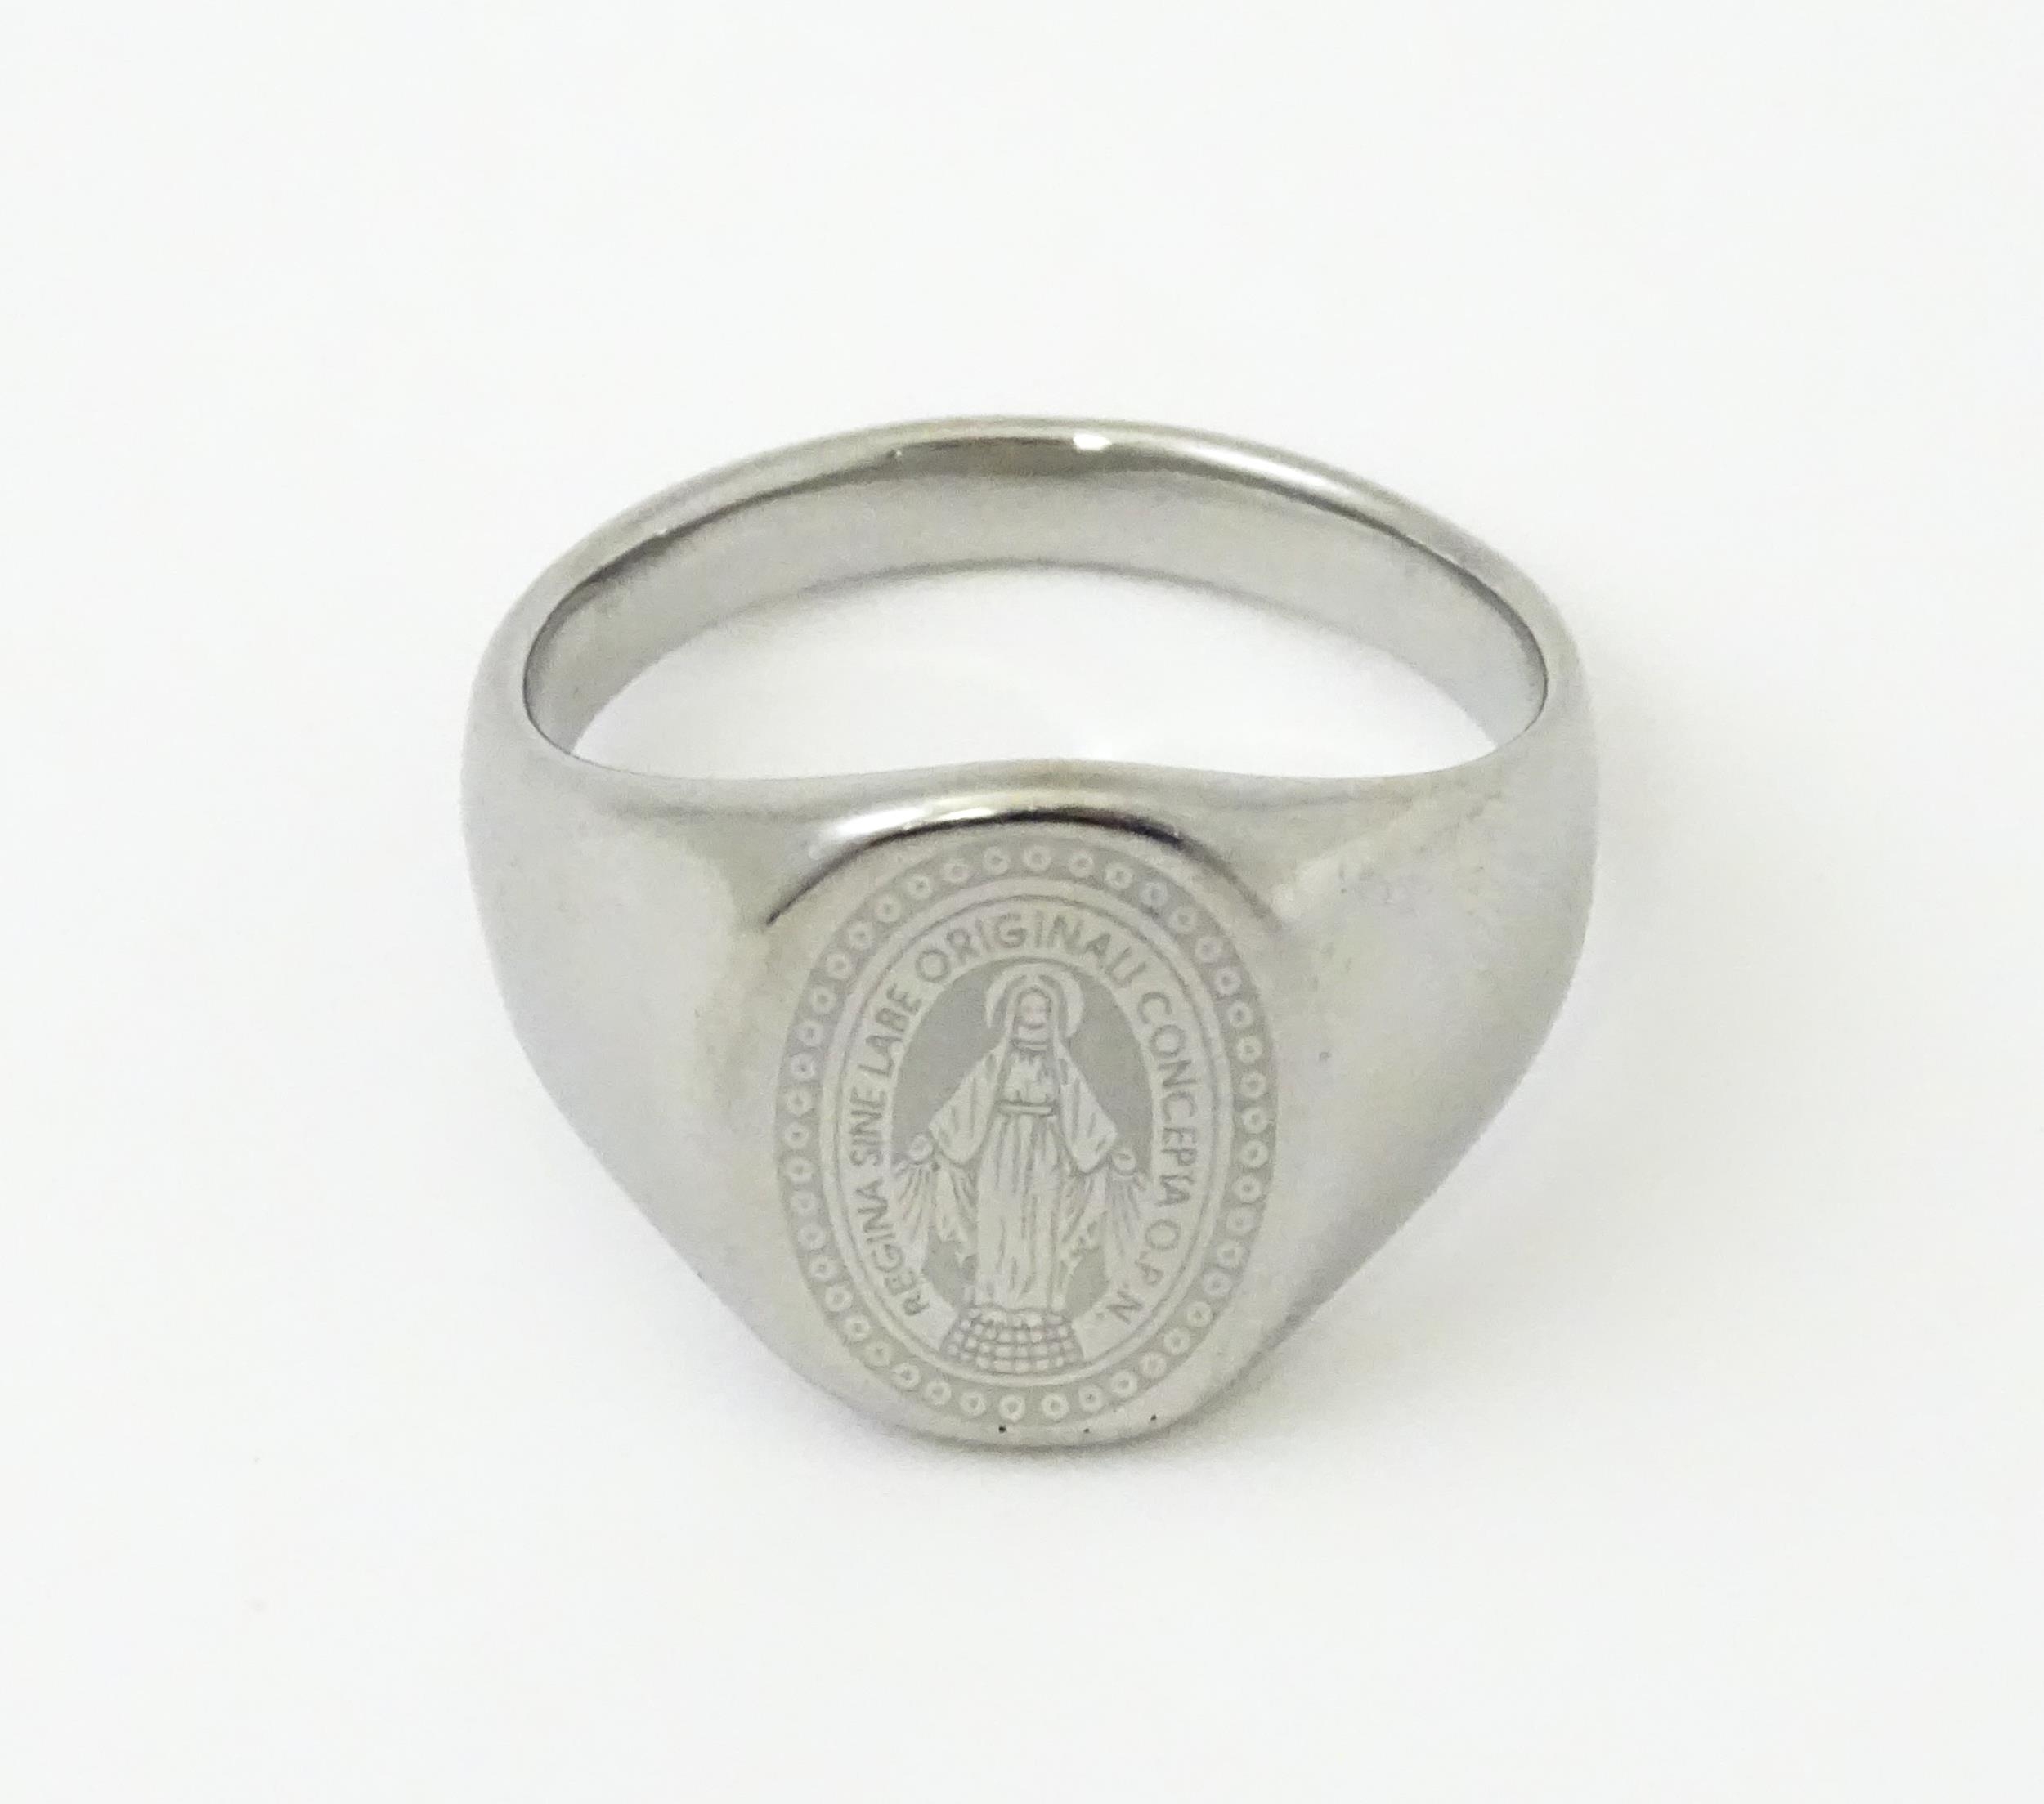 A Gentleman's white metal ring with engraved Christian symbolism depicting the Virgin Mary and